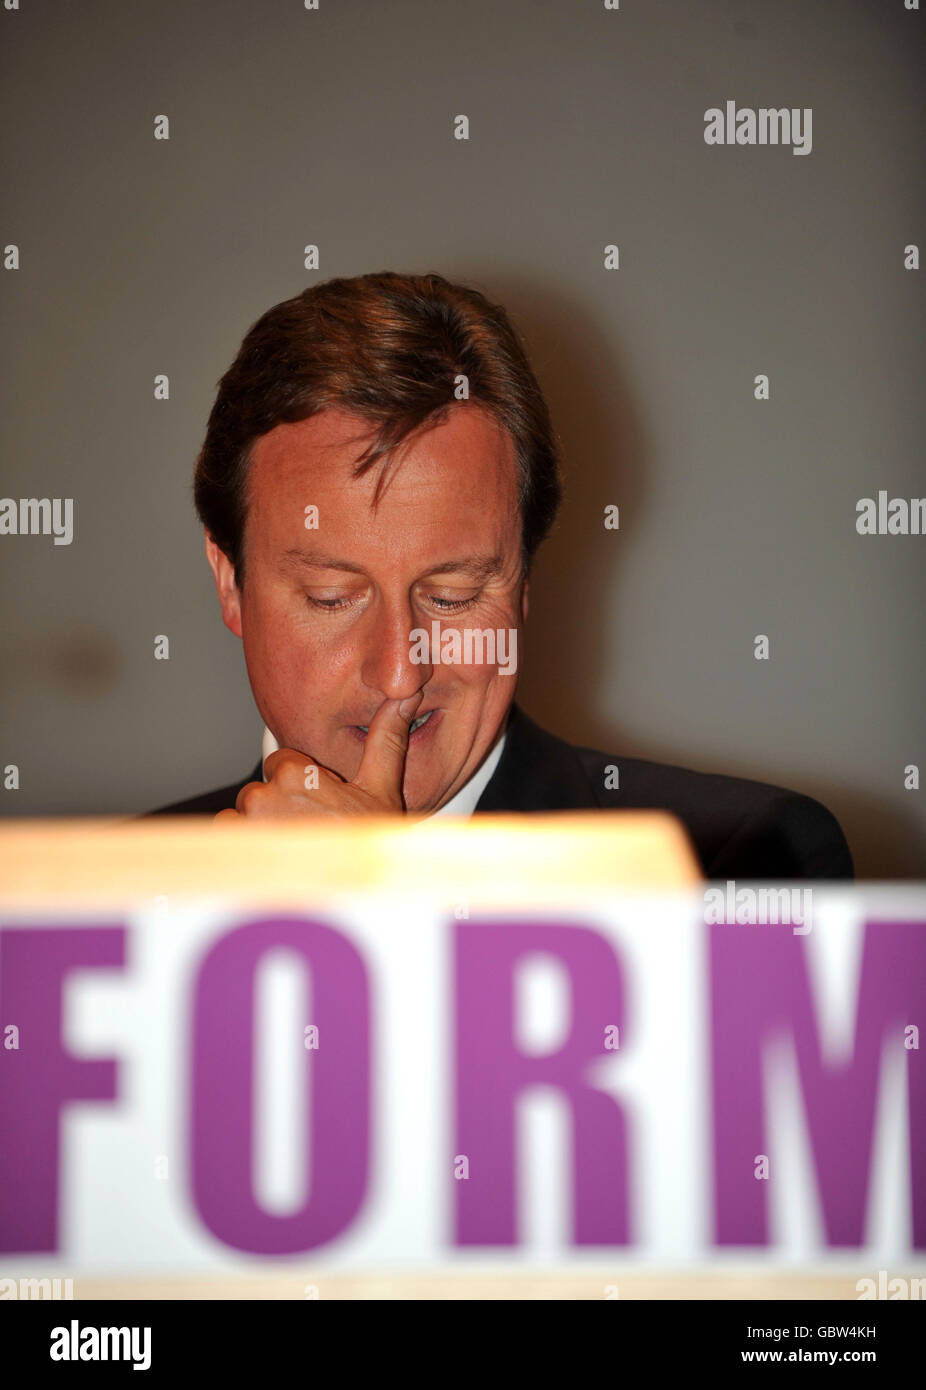 Conservative Party leader David Cameron addresses the Reform think-tank pledging to cut the number of quangos - starting with communications regulator Ofcom, at the Clifford Chance building, in London Docklands. Stock Photo